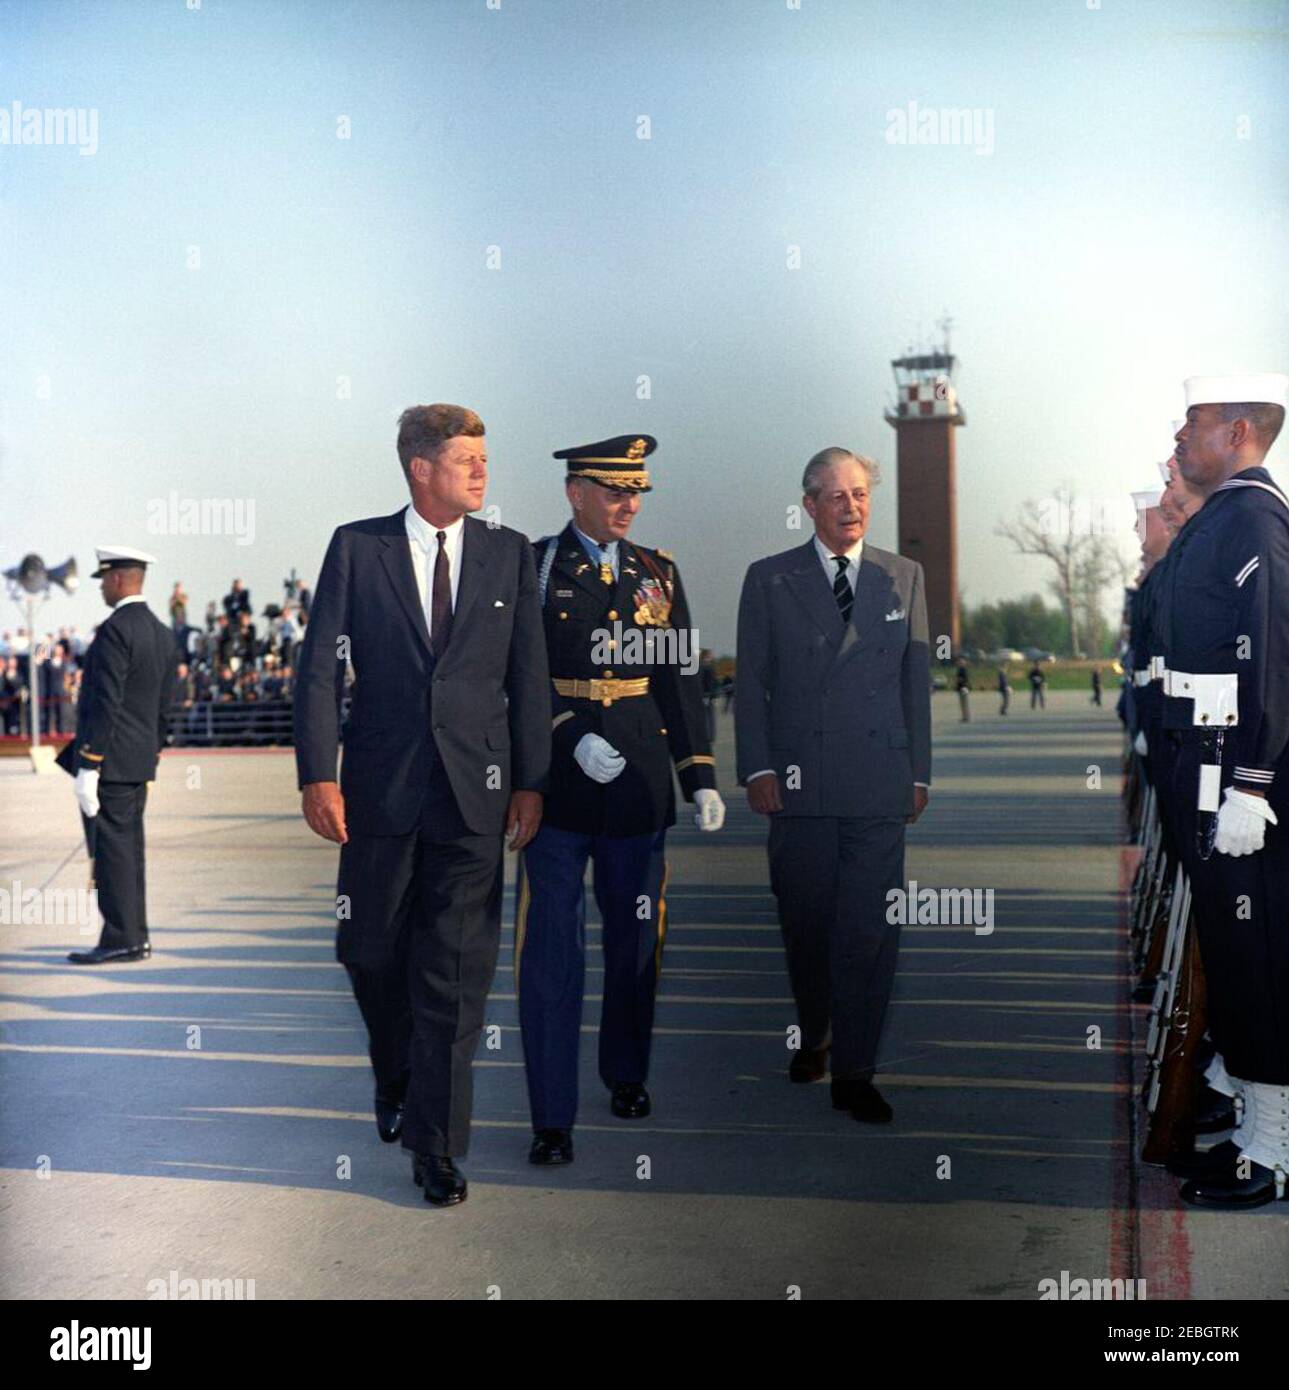 Arrival ceremonies for Harold Macmillan, Prime Minister of Great Britain, 4:50PM. Commander of Troops, Lieutenant Colonel Charles P. Murray, Jr. (center), escorts President John F. Kennedy and Prime Minister of Great Britain, Harold Macmillan, past the United States Navy Honor Guard during arrival ceremonies for Prime Minister Macmillan. Andrews Air Force Base, Maryland. Stock Photo